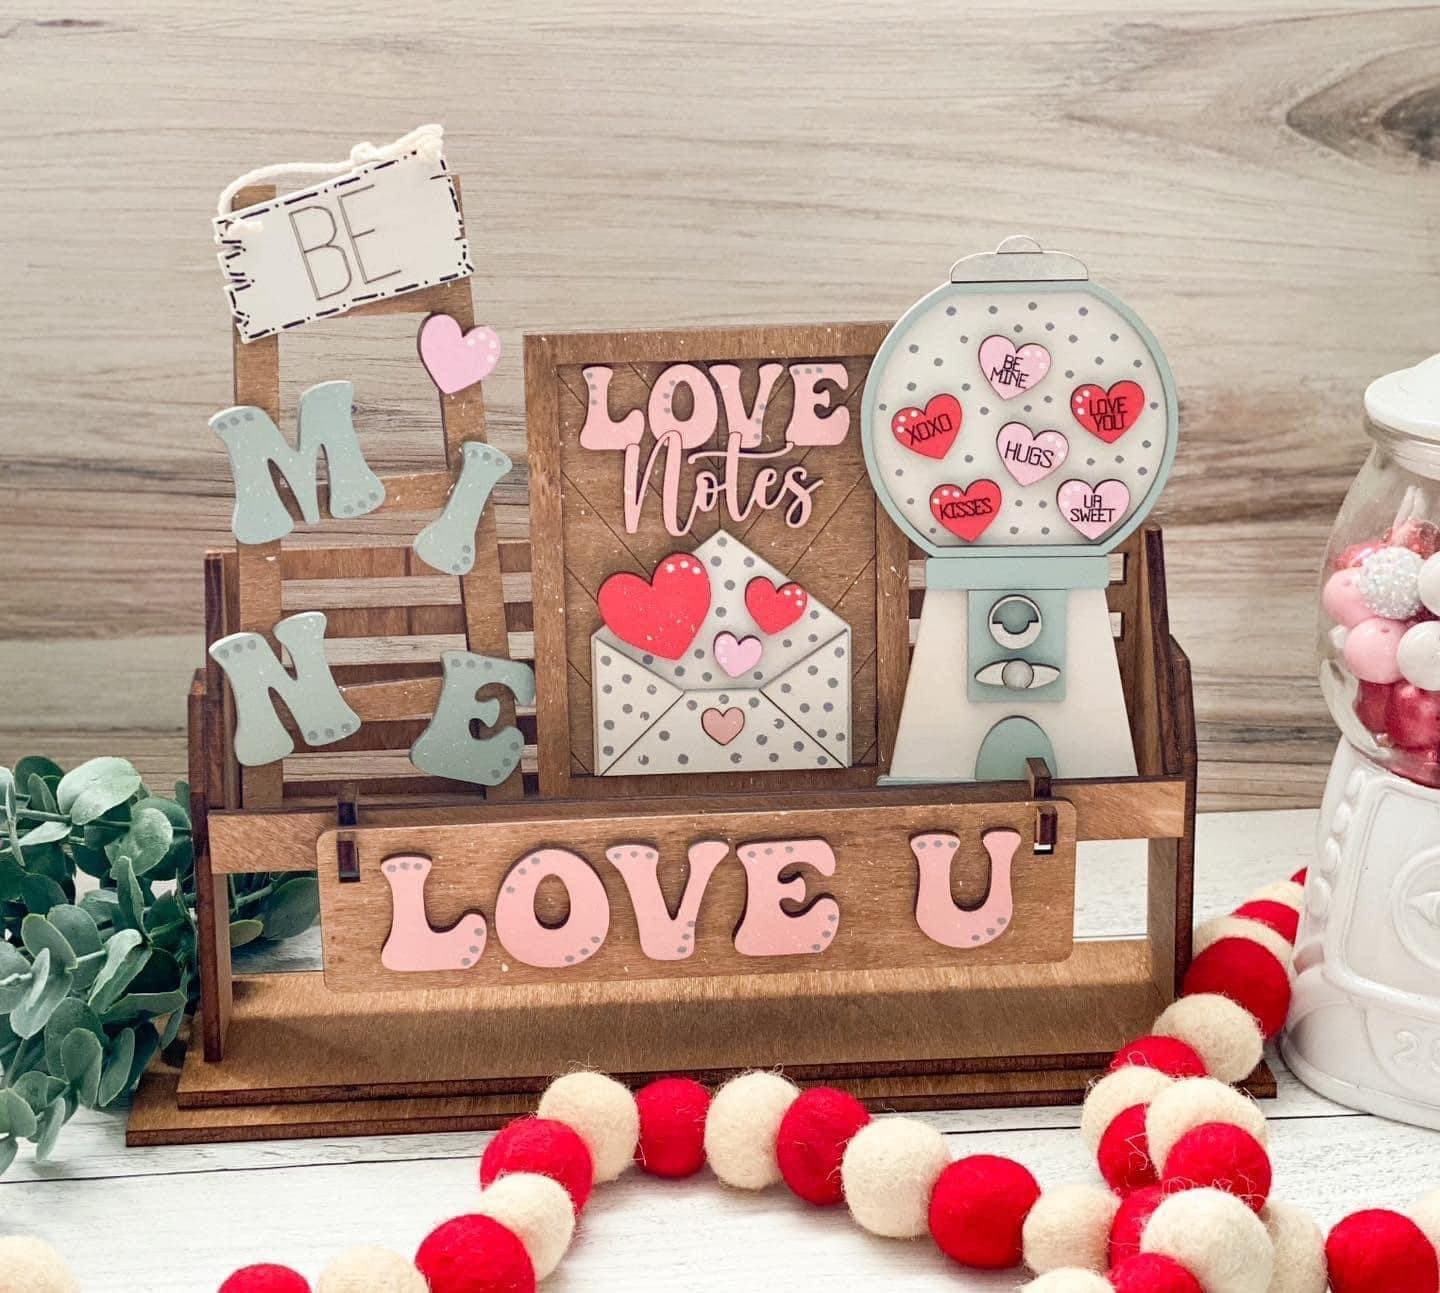 BE MINE, VALENTINES Day, Picture Frame, Sublimation Blanks, Unisub